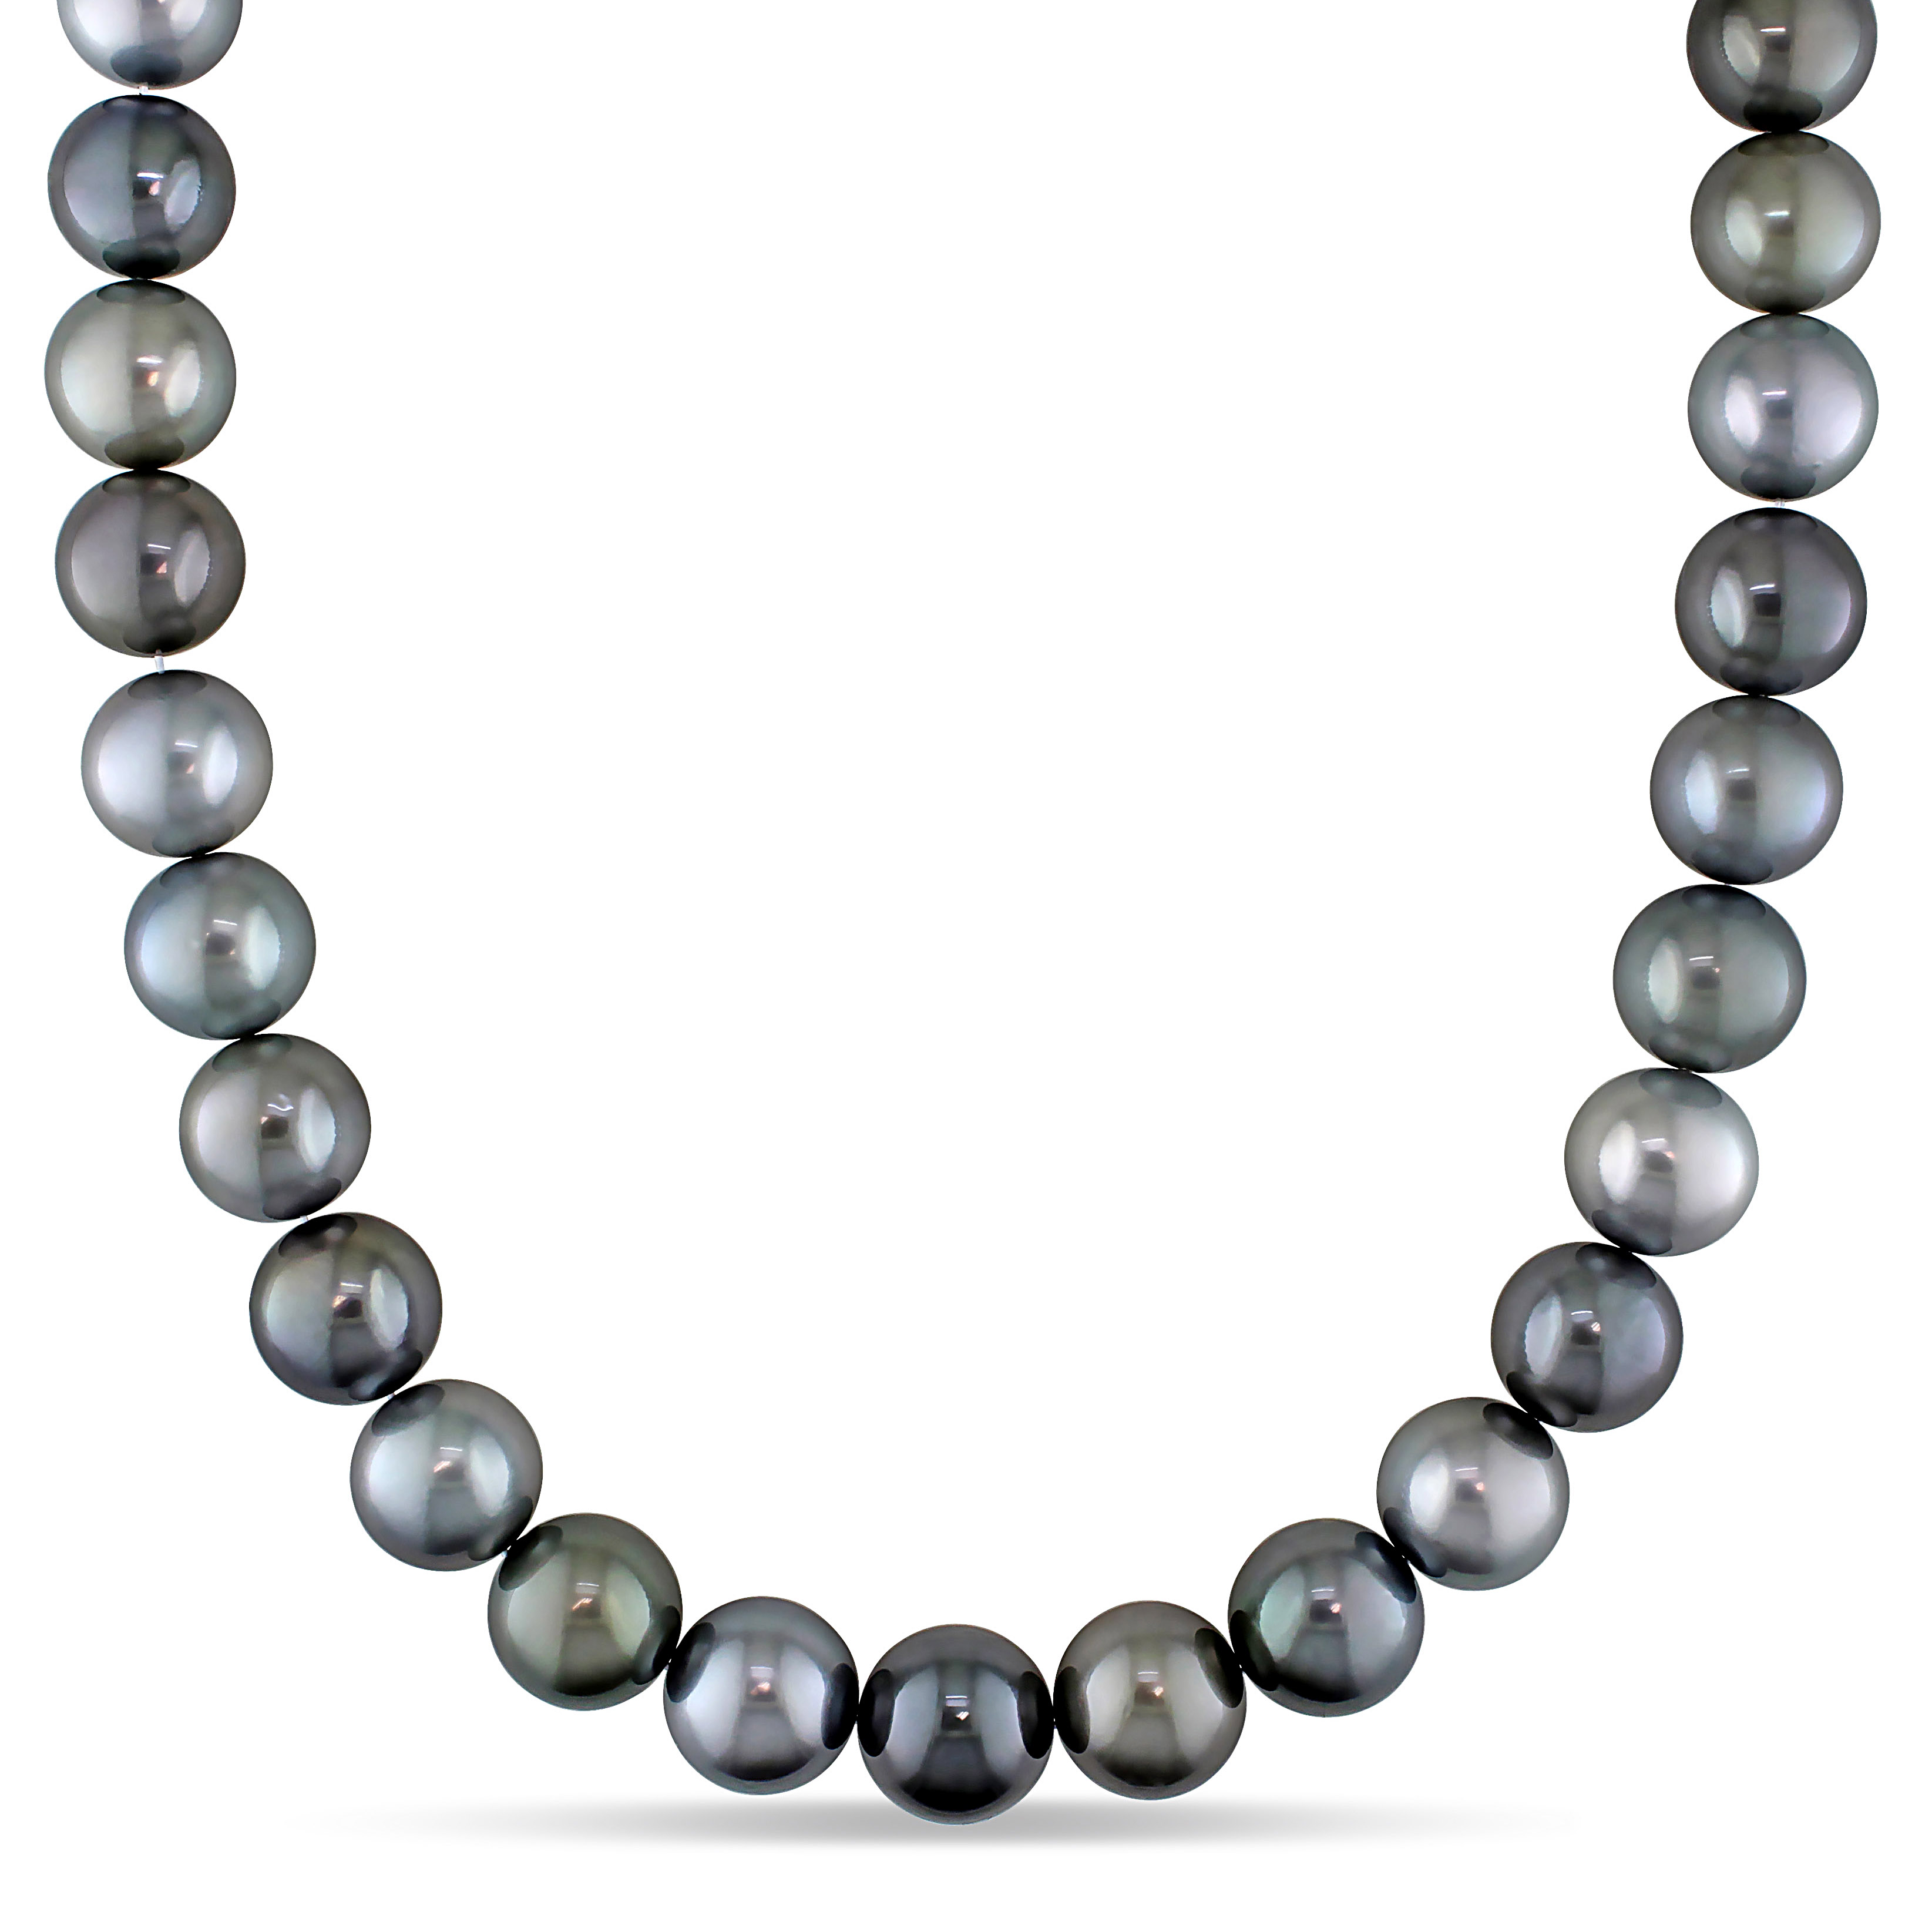 13-14 MM Multi Shades Black Tahitian Pearl Necklace with 14k White GoldDiamond Accent Ball Clasp - 18 in